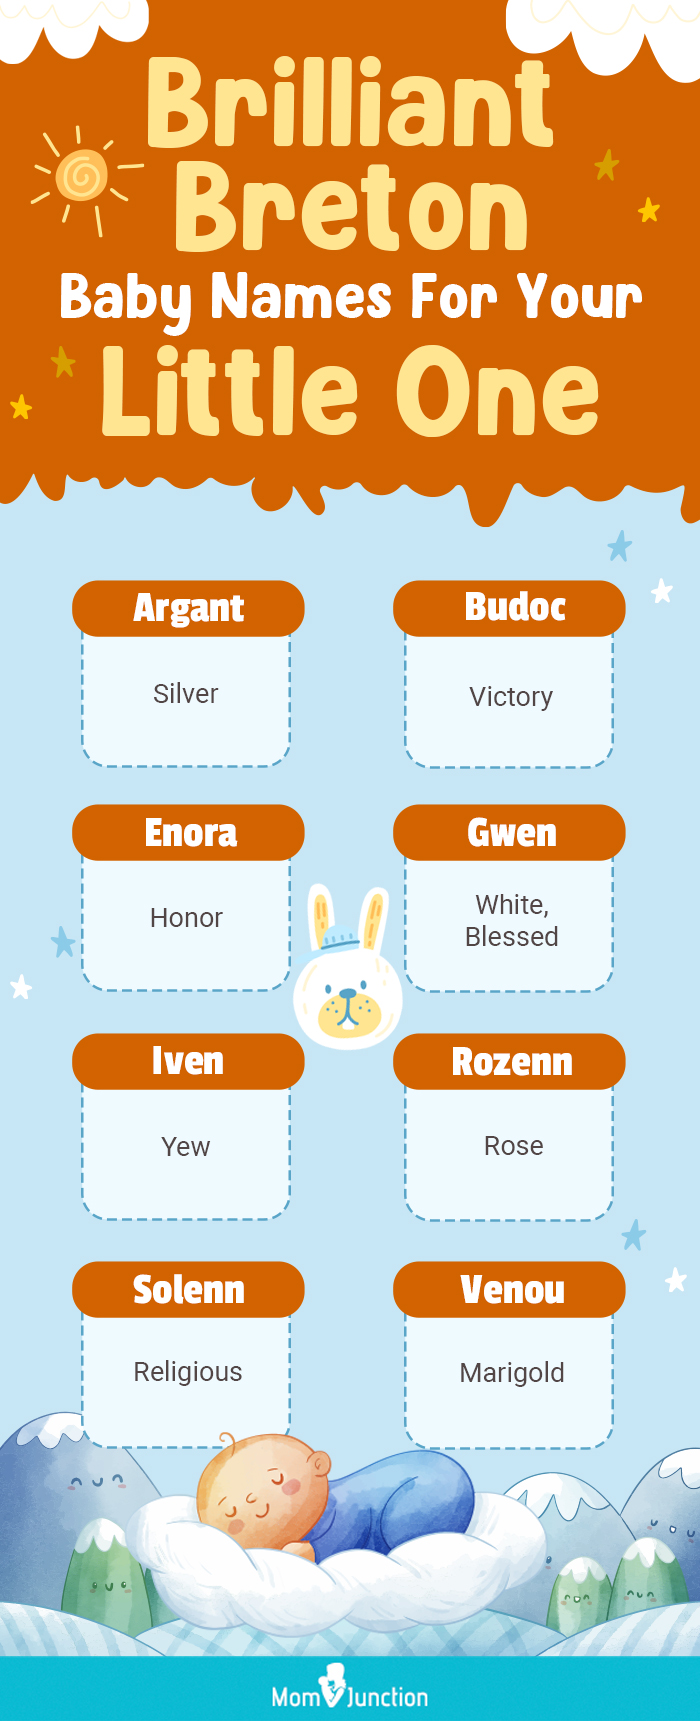 brilliant breton baby names for your little one (infographic)